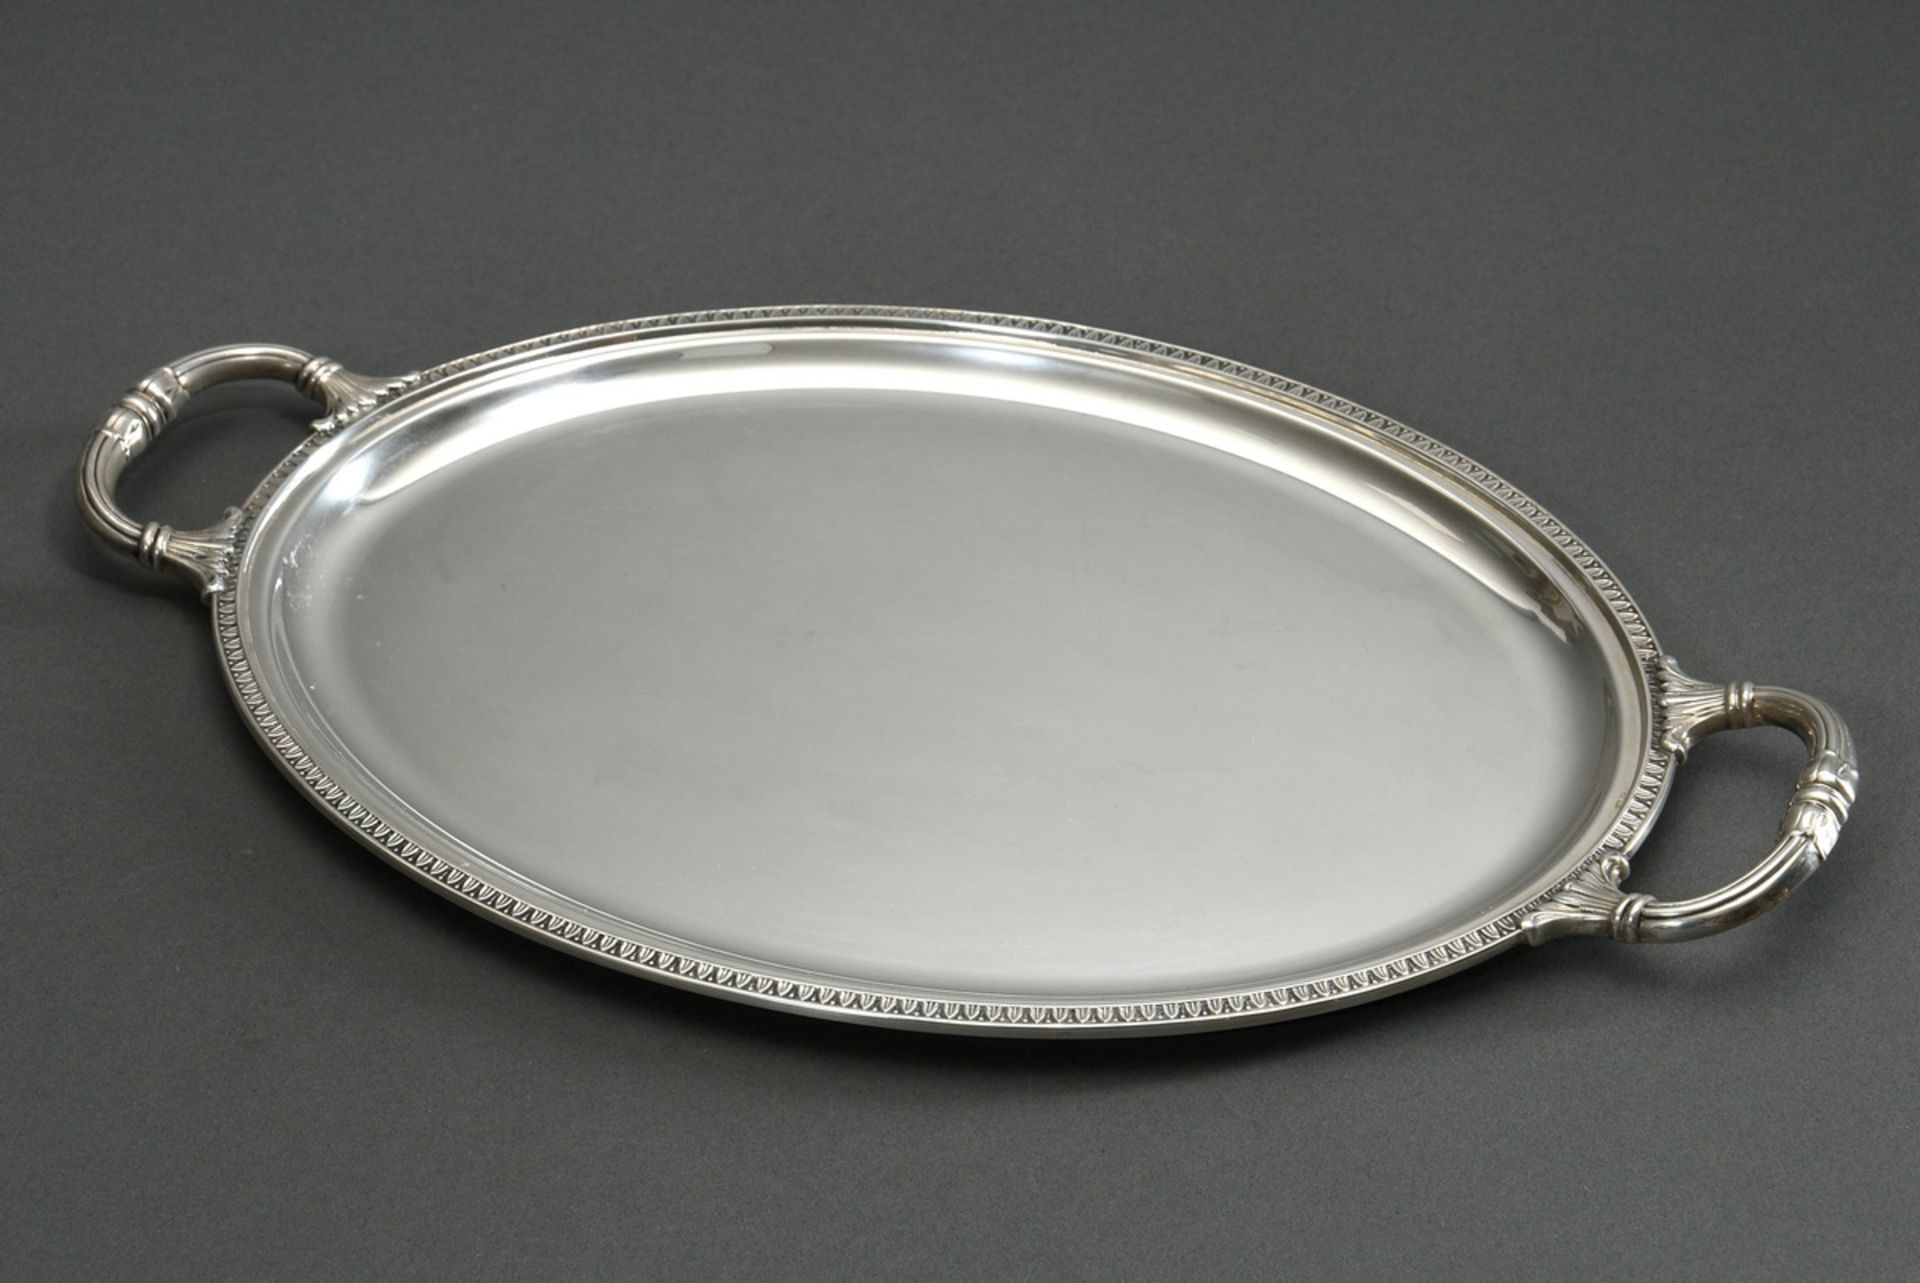 Oval tray in classical shape with relief rim and handles, silver 800, 525g, 41,6x24,6cm, slight sig